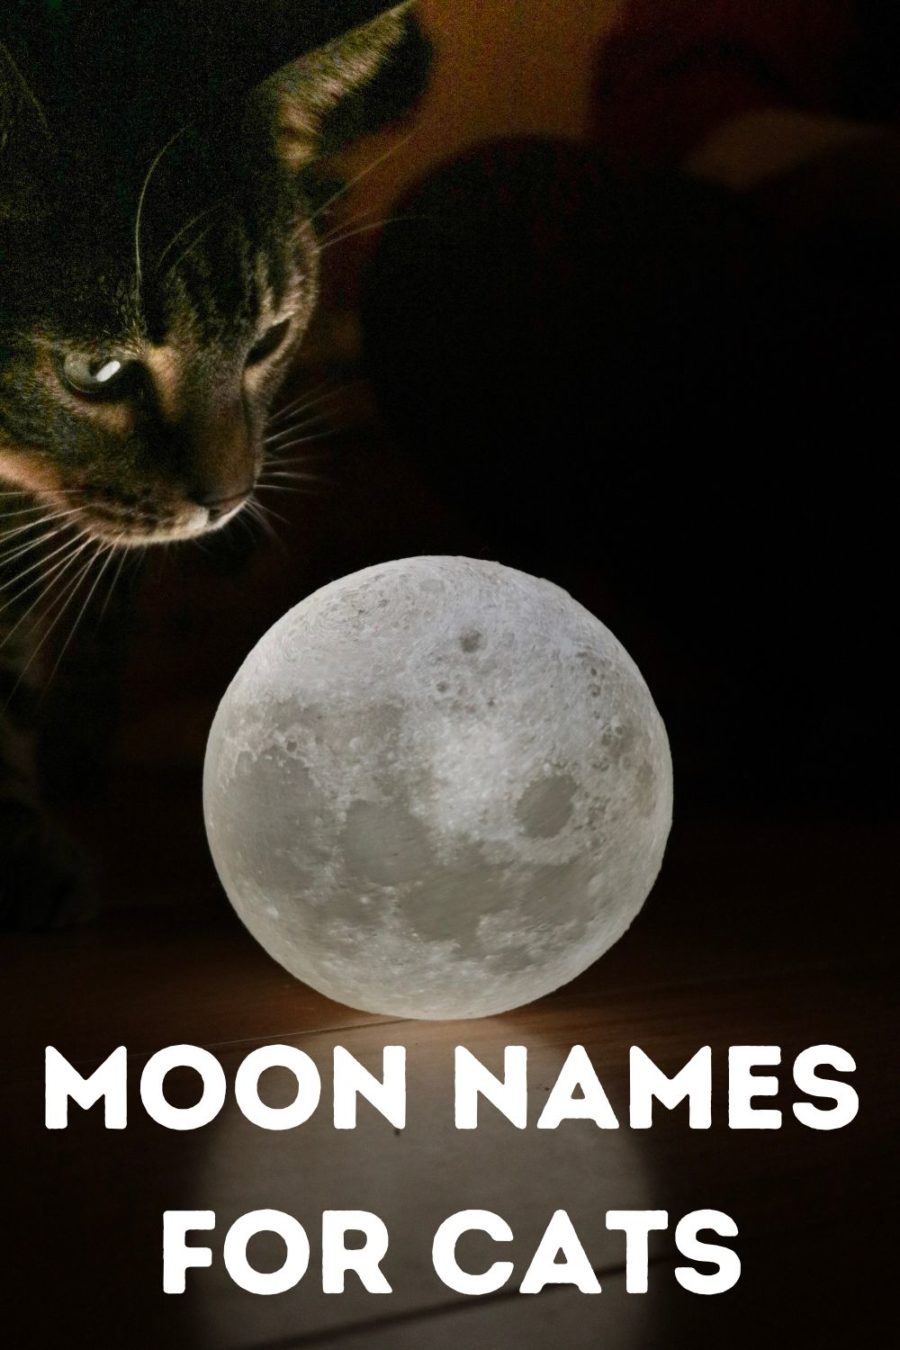 Moon Names for Cats